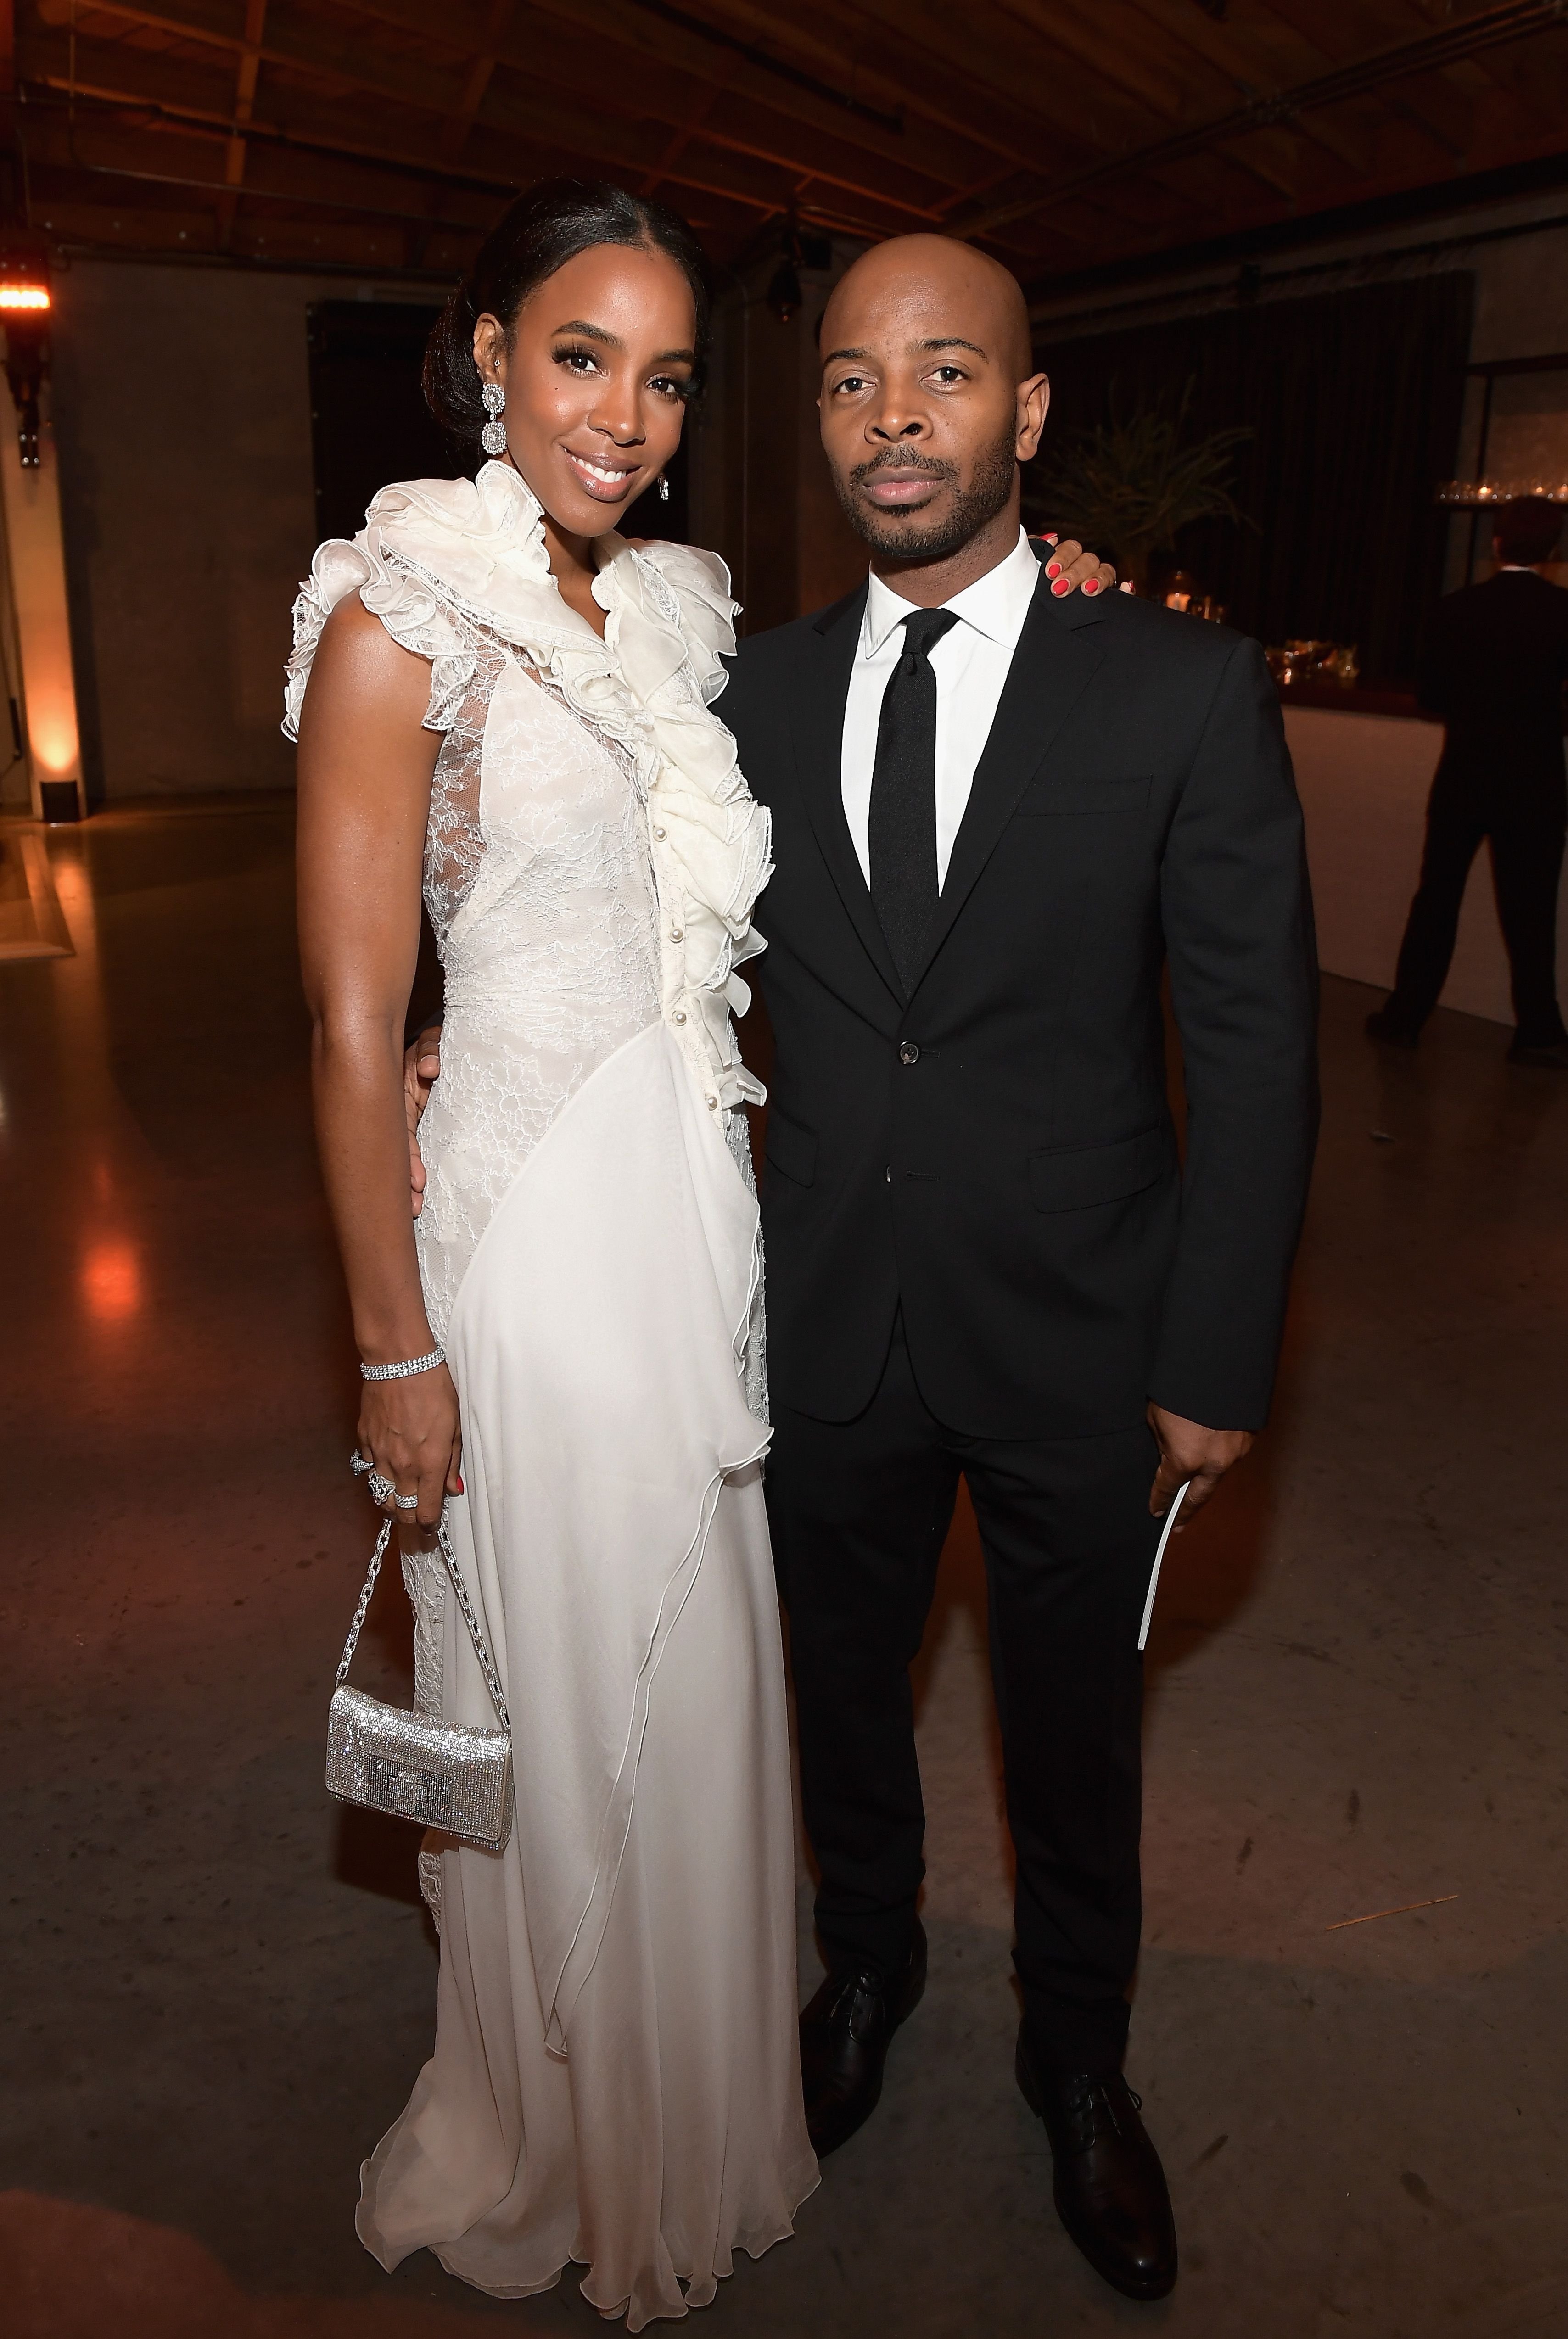 Kelly Rowland with husband Tim Weatherspoon at the 2017 Baby2Baby Gala presented by Paul Mitchell in Los Angeles, California. | Photo: Getty Images